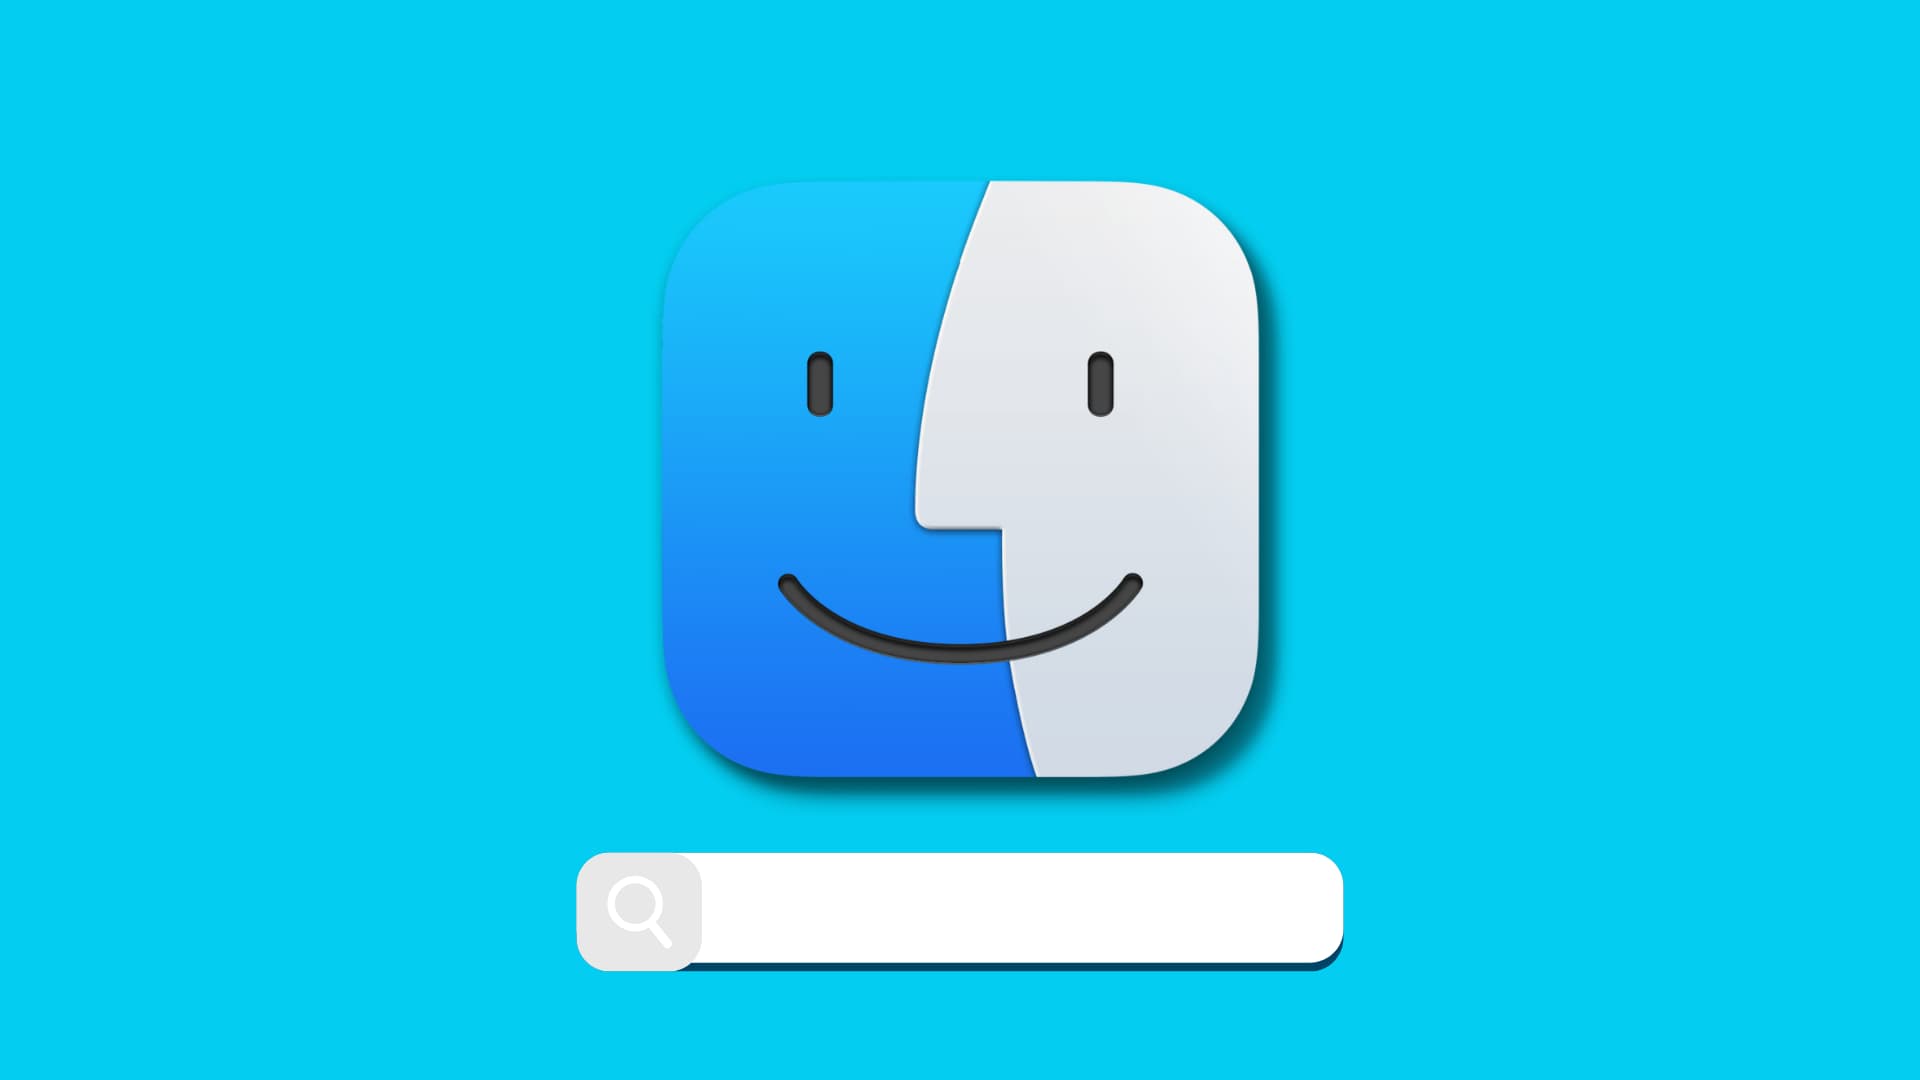 Mac Finder icon with a search bar below it